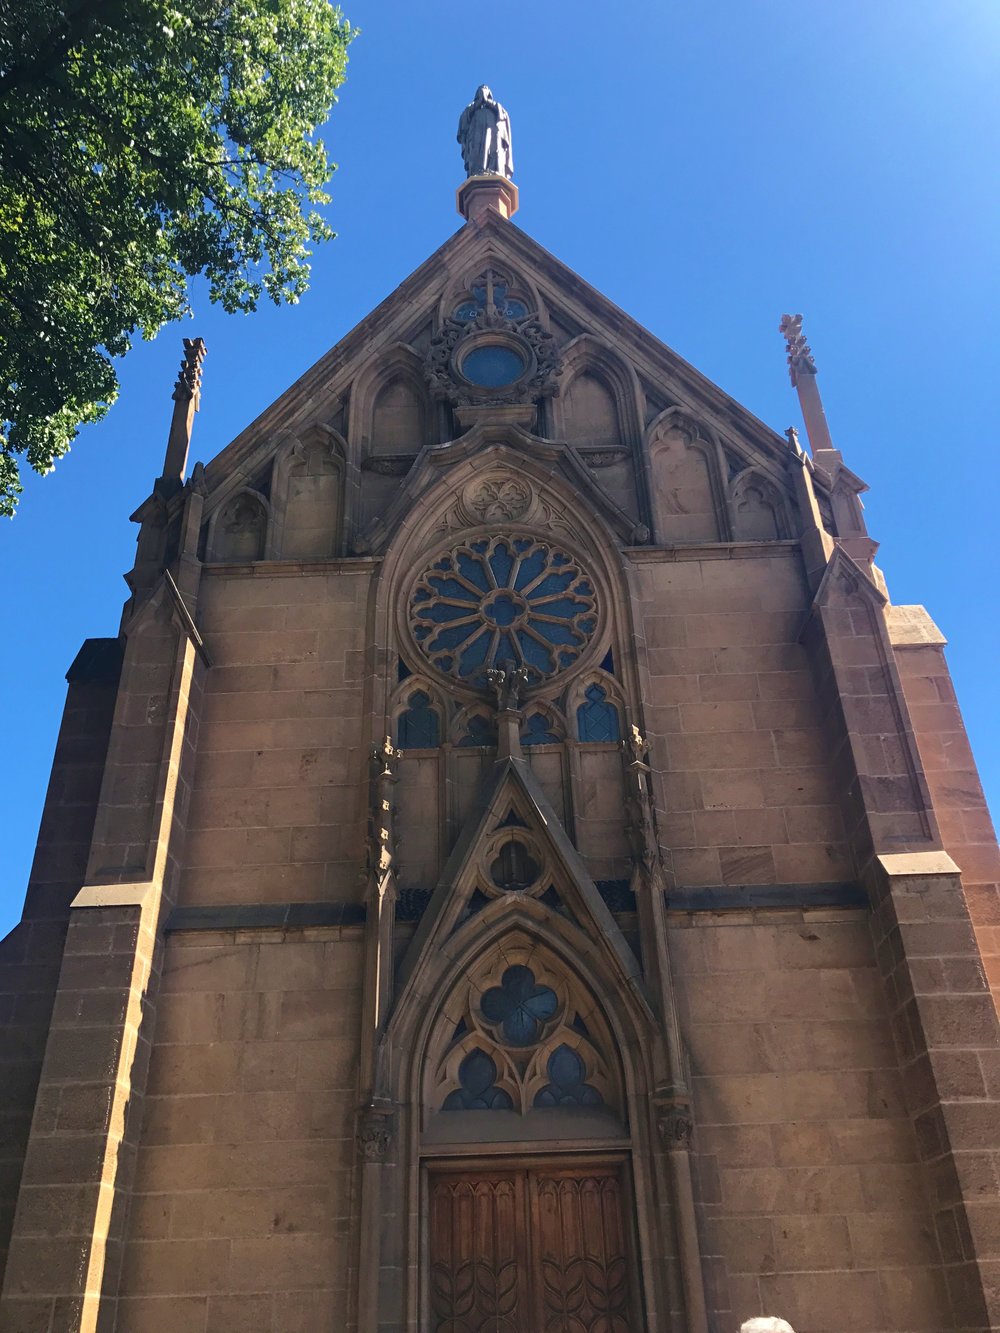 Exterior of the Loretto Chapel